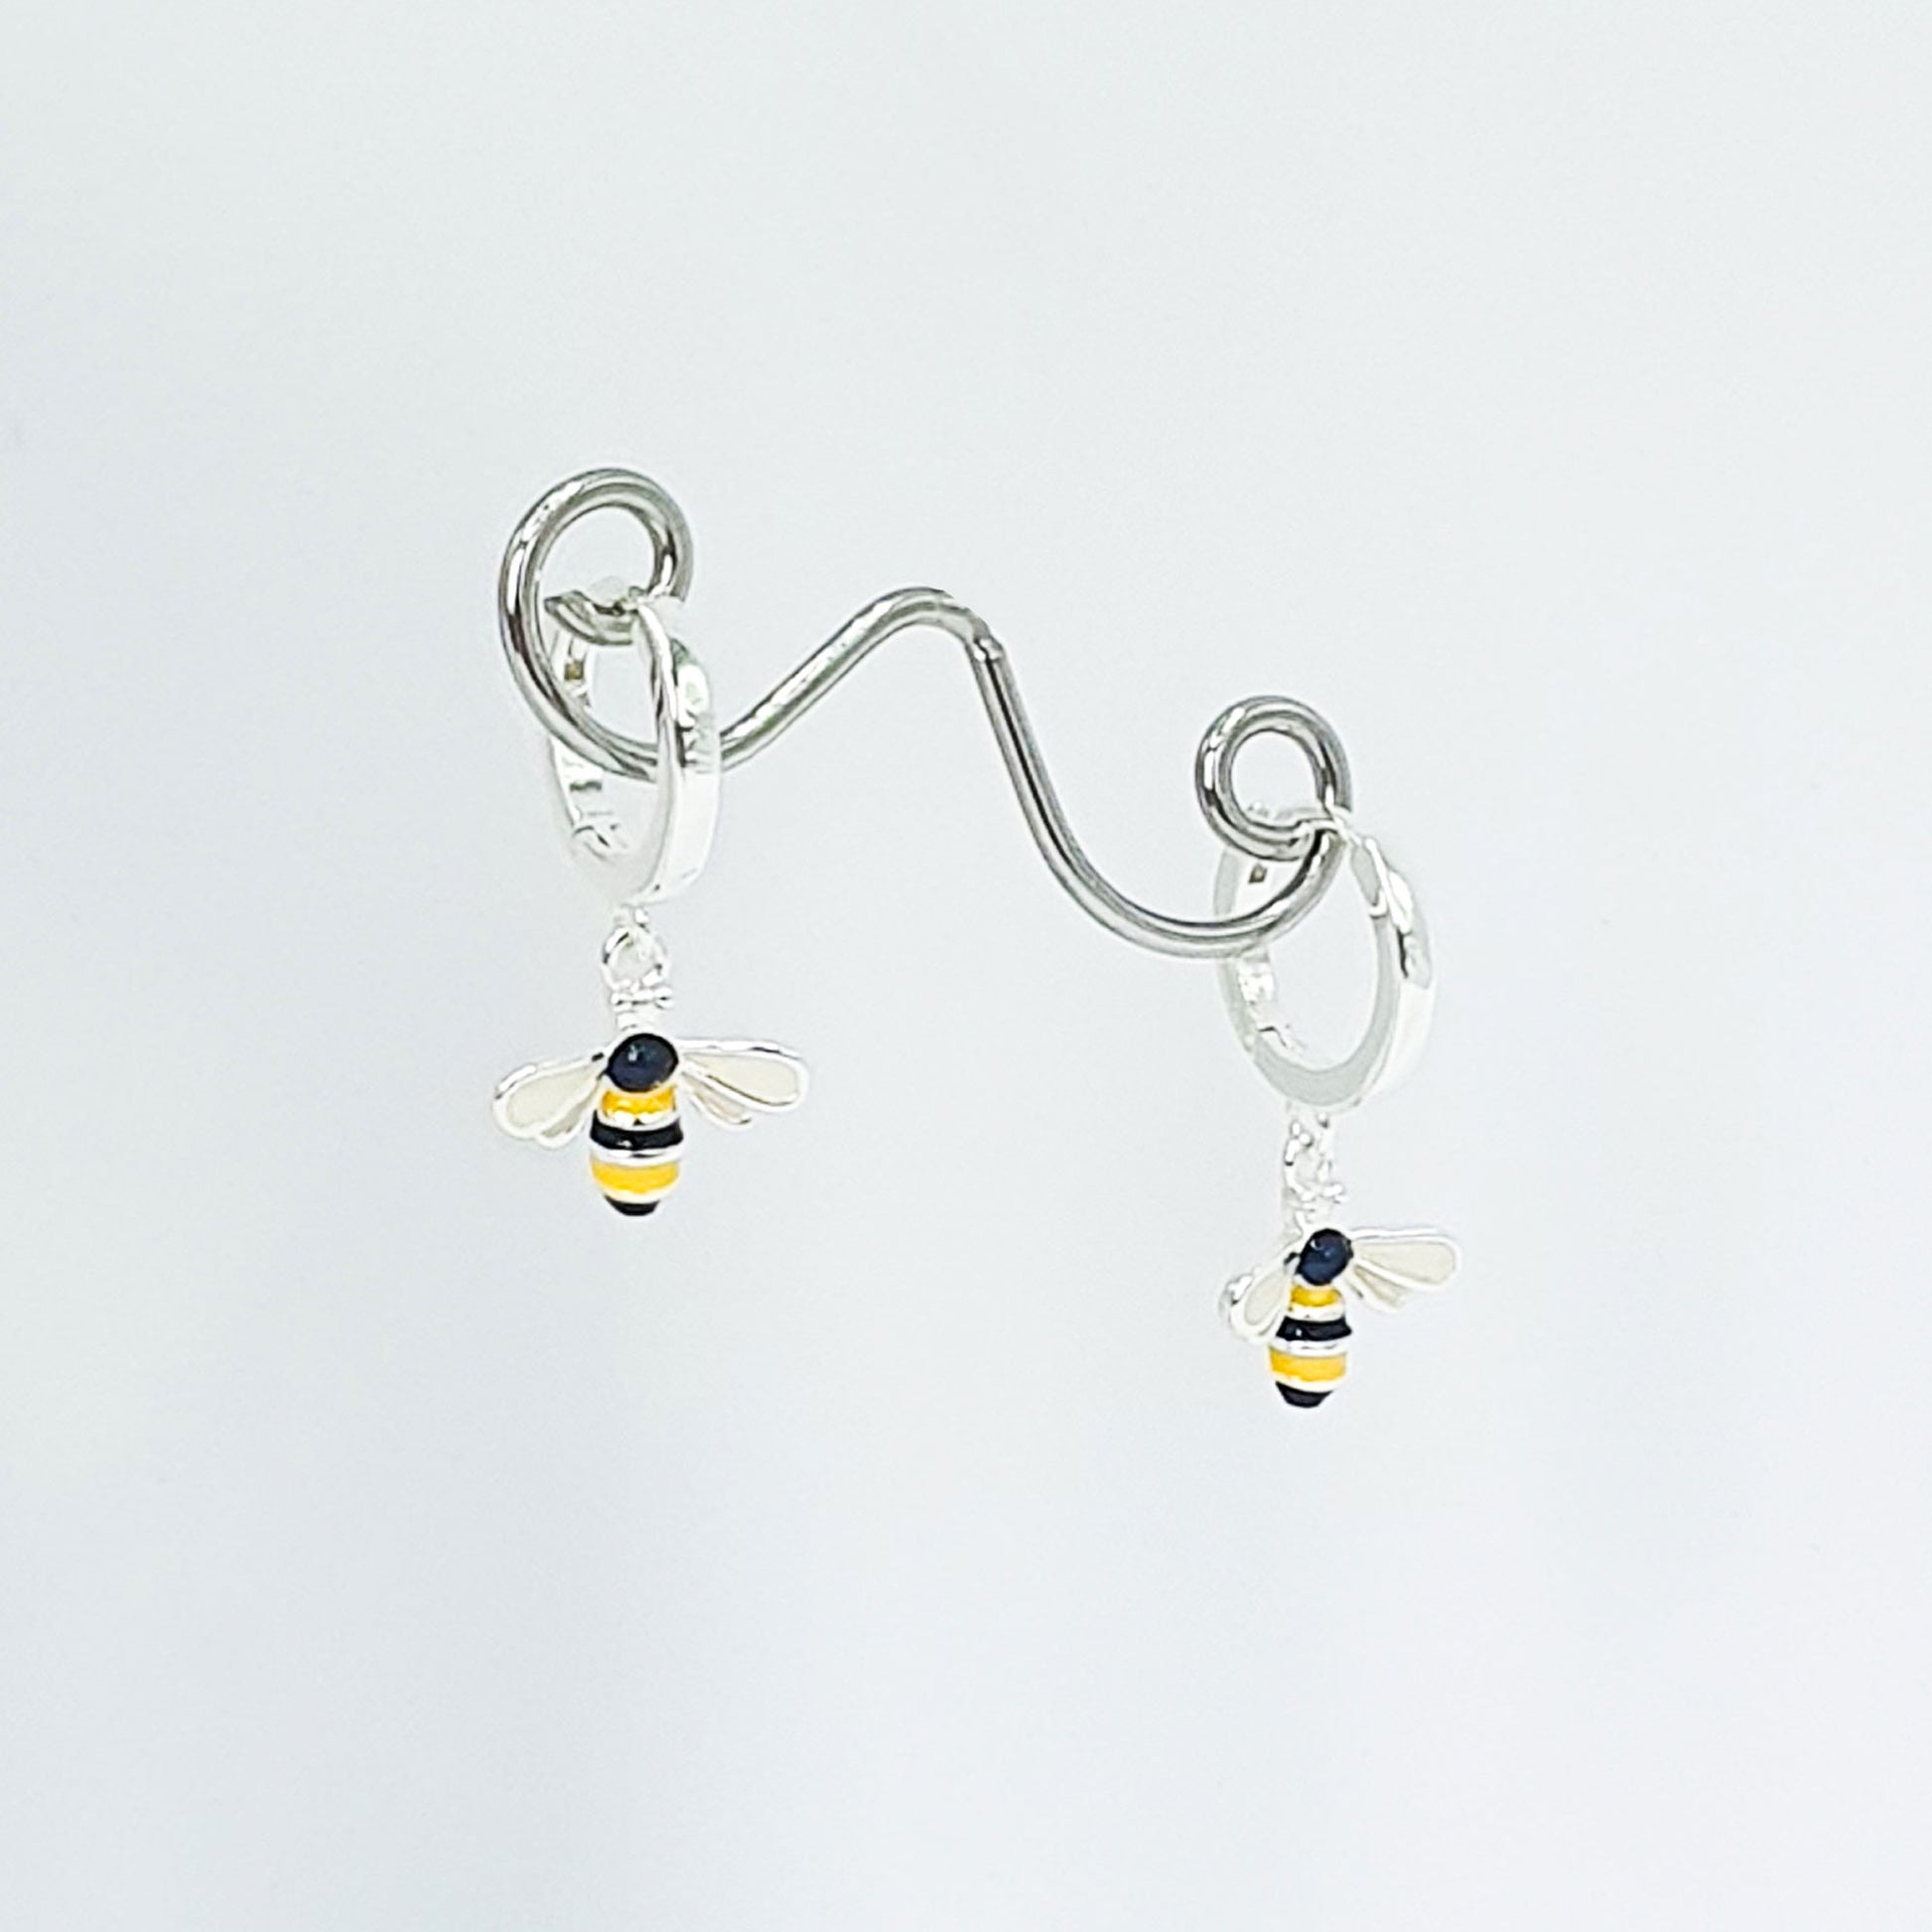 Black & yellow enamelled bees on silver plated hoops